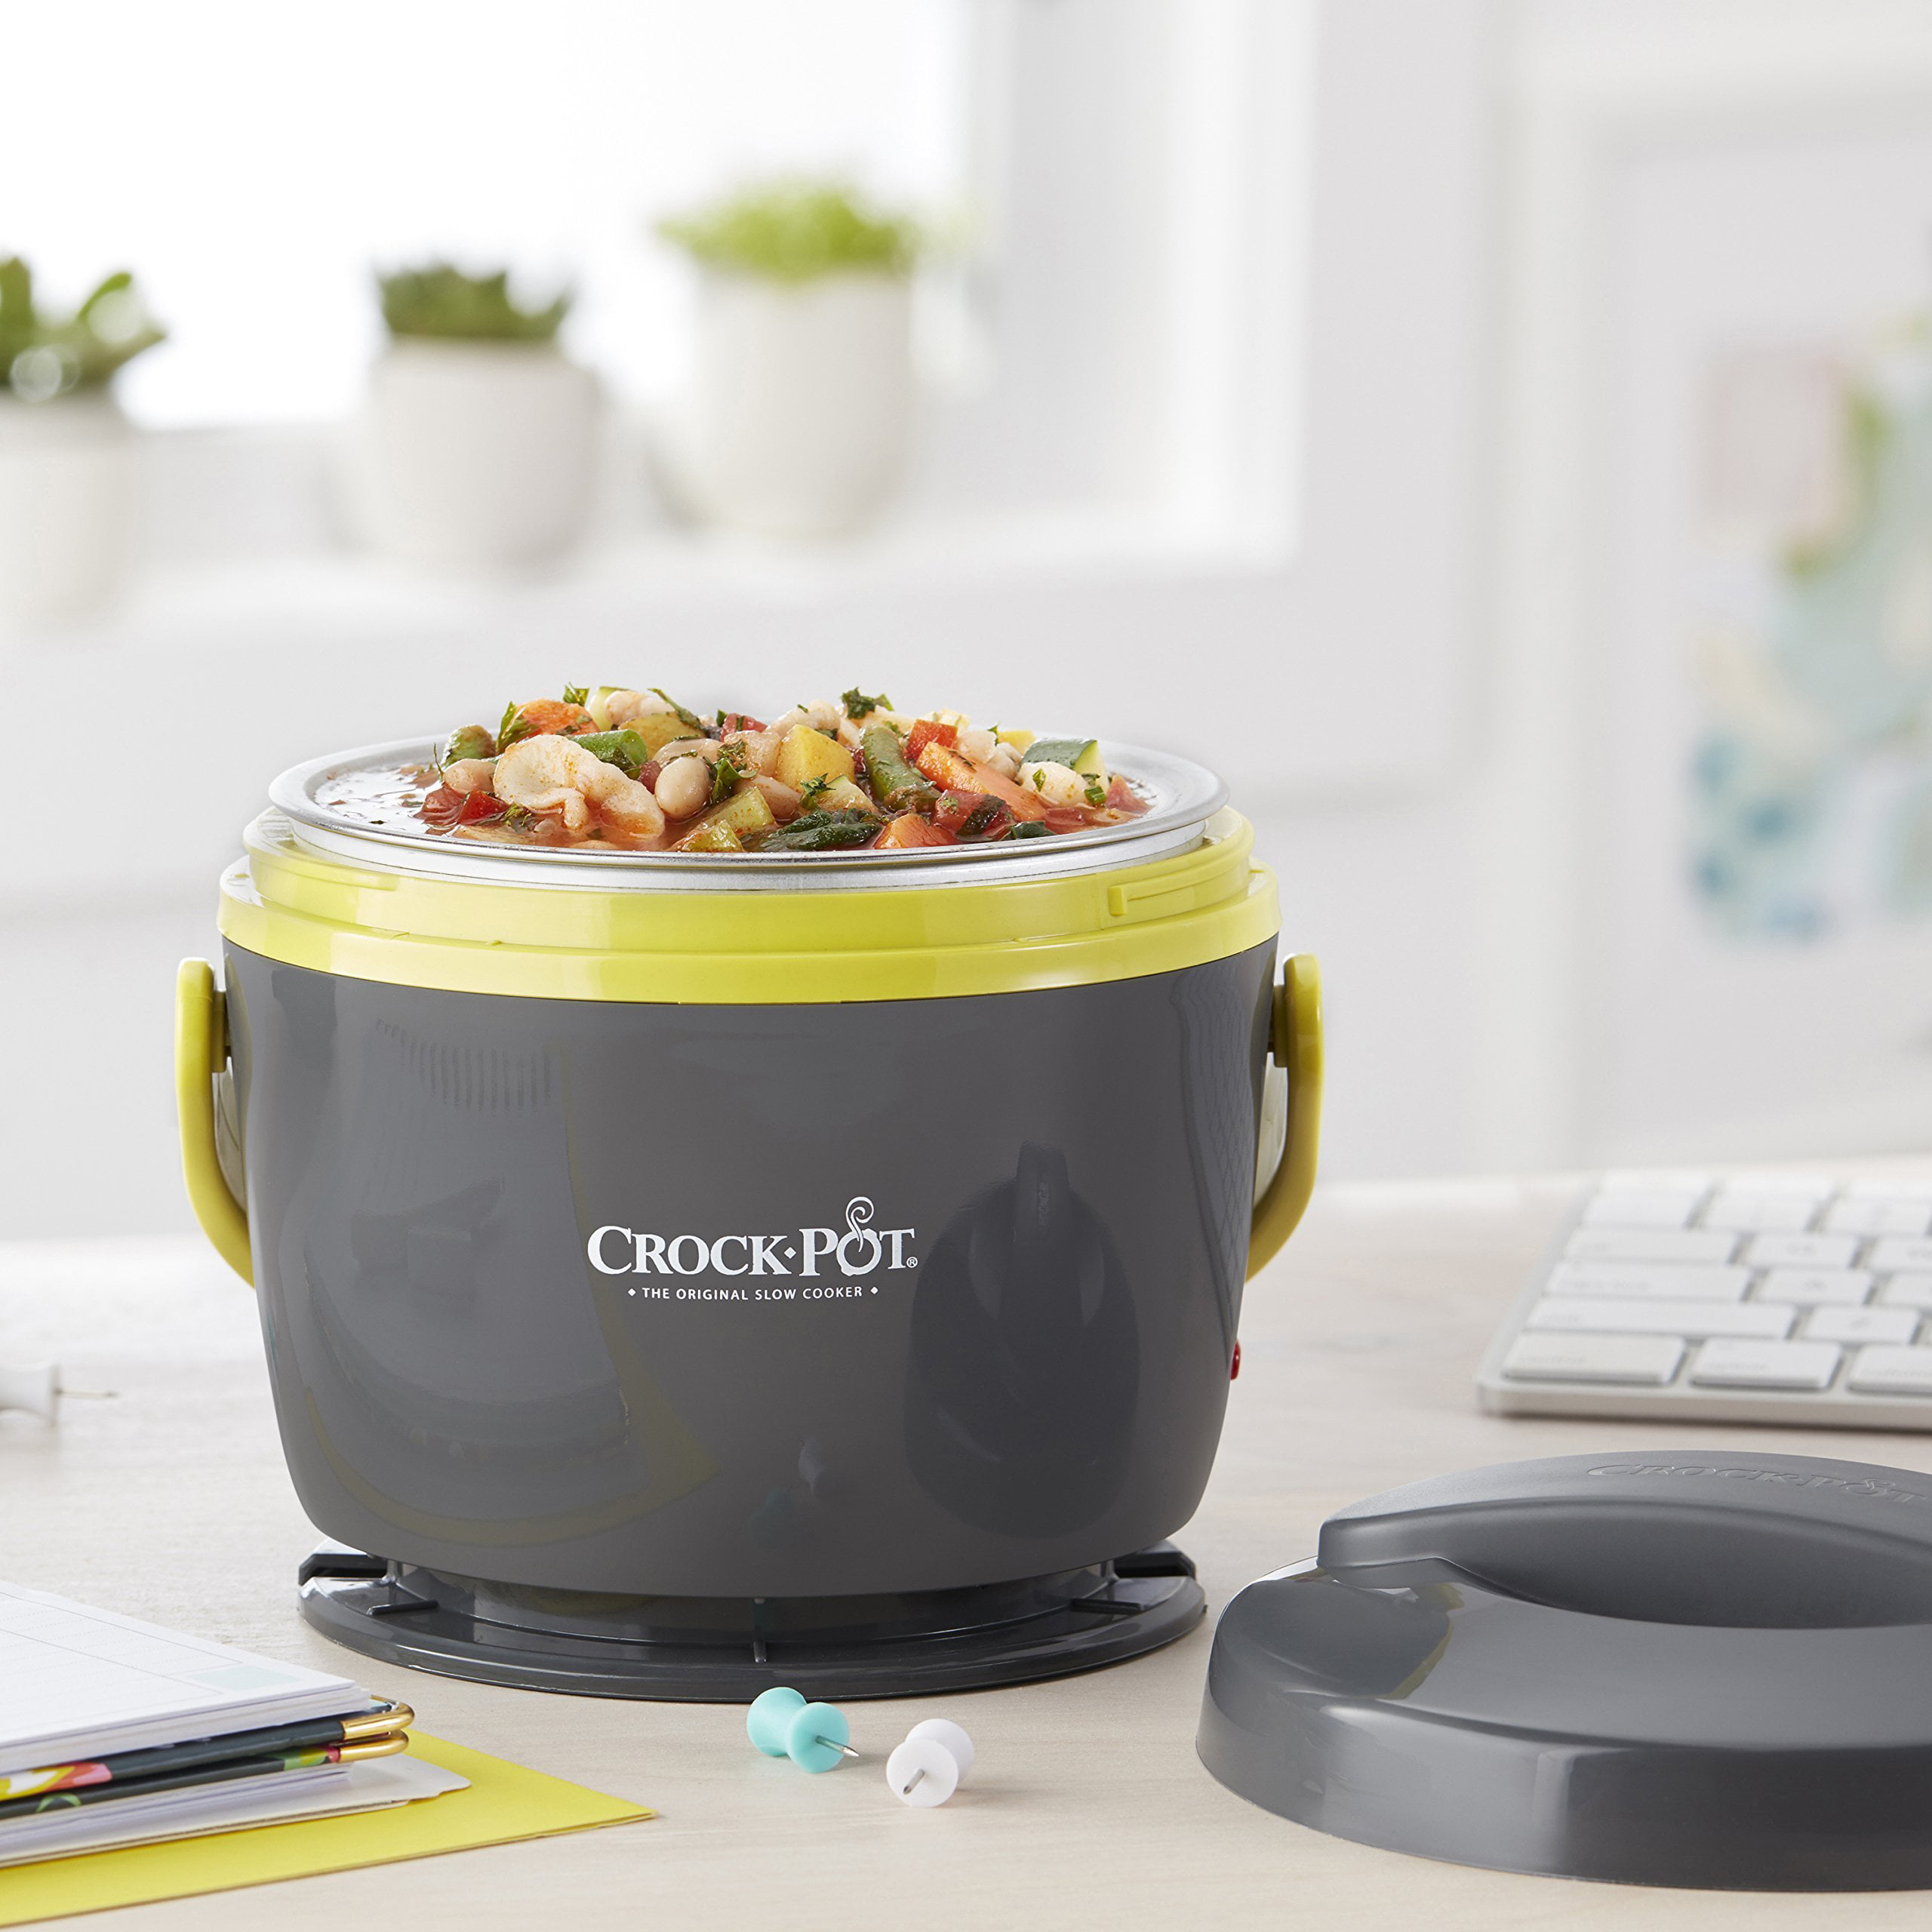  Crock-Pot Electric Lunch Box, Portable Food Warmer for  On-the-Go, 20-Ounce, Grey/Lime: Travel Crock Pot: Home & Kitchen